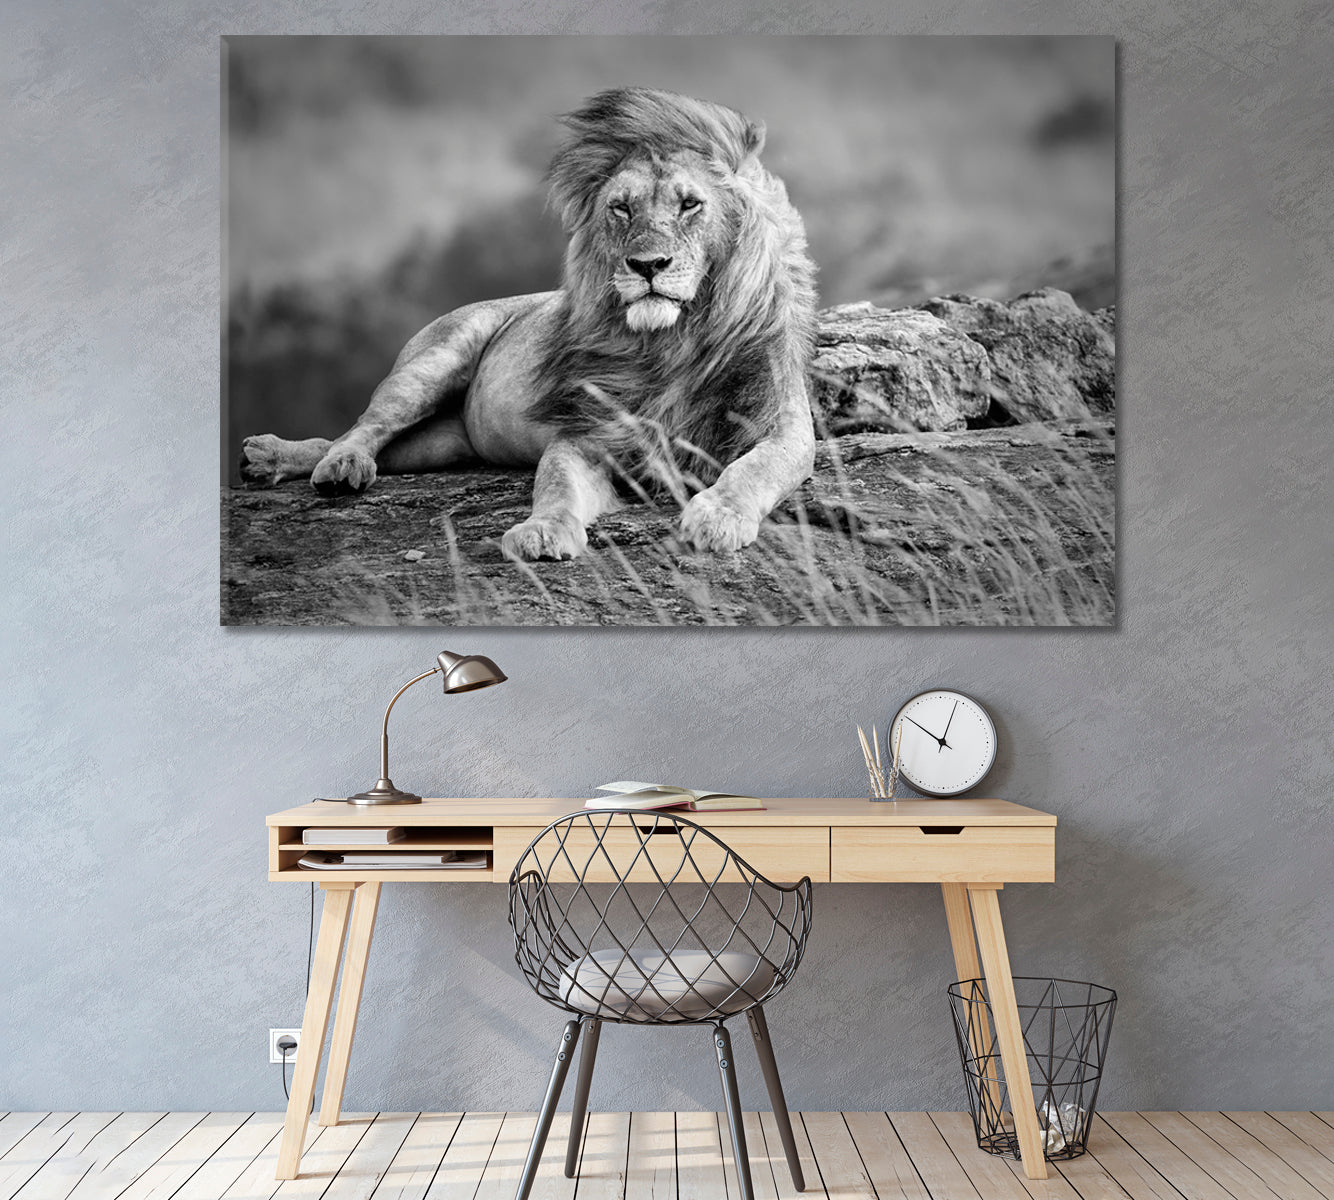 Mighty Lion in African Savanna Kenya Canvas Print ArtLexy 1 Panel 24"x16" inches 